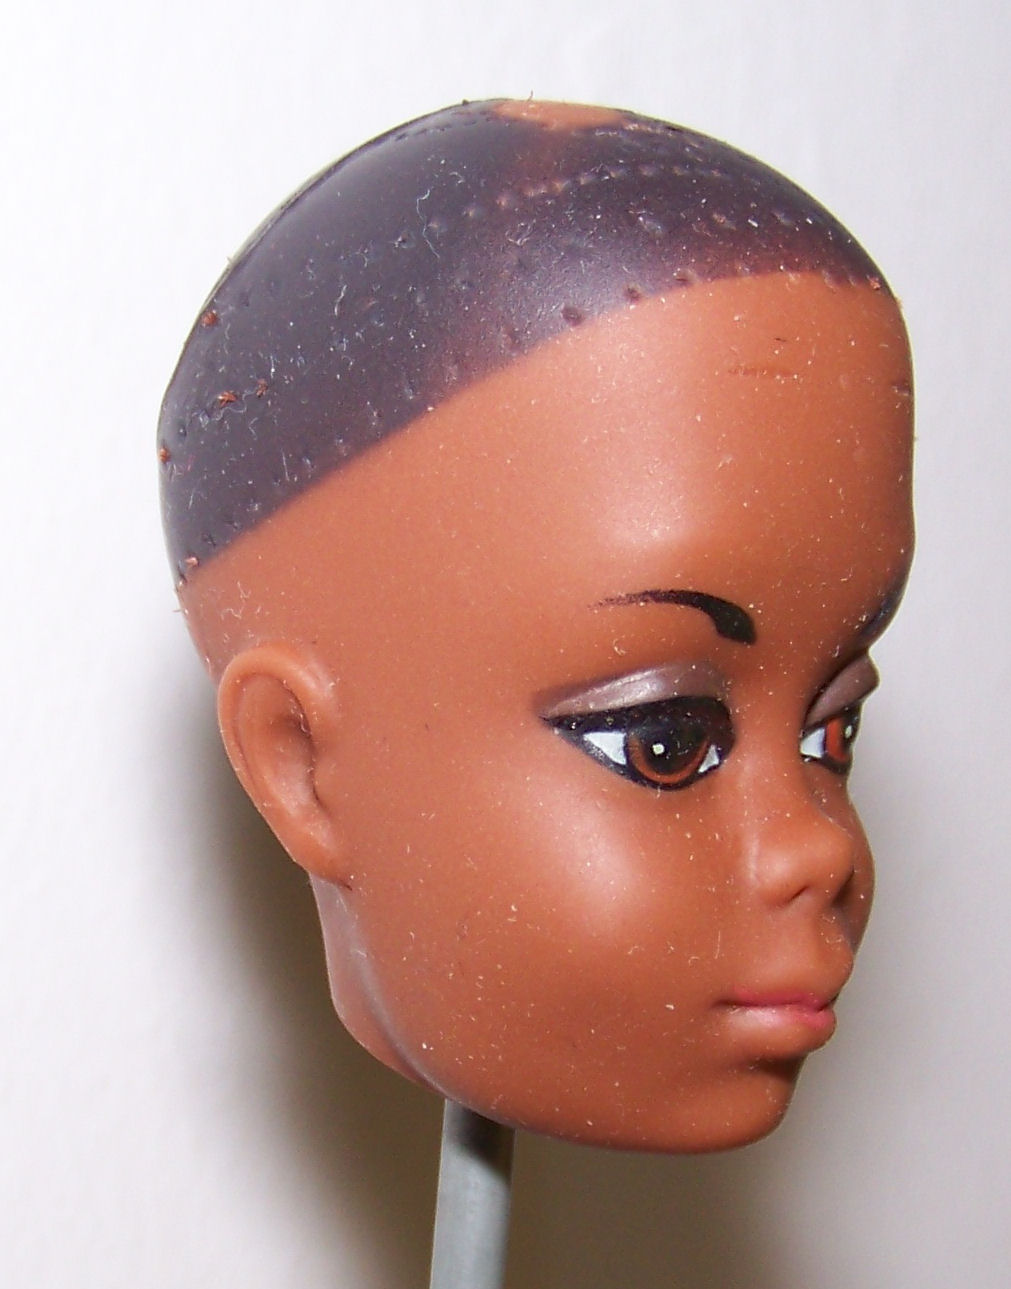 barbie with shaved head